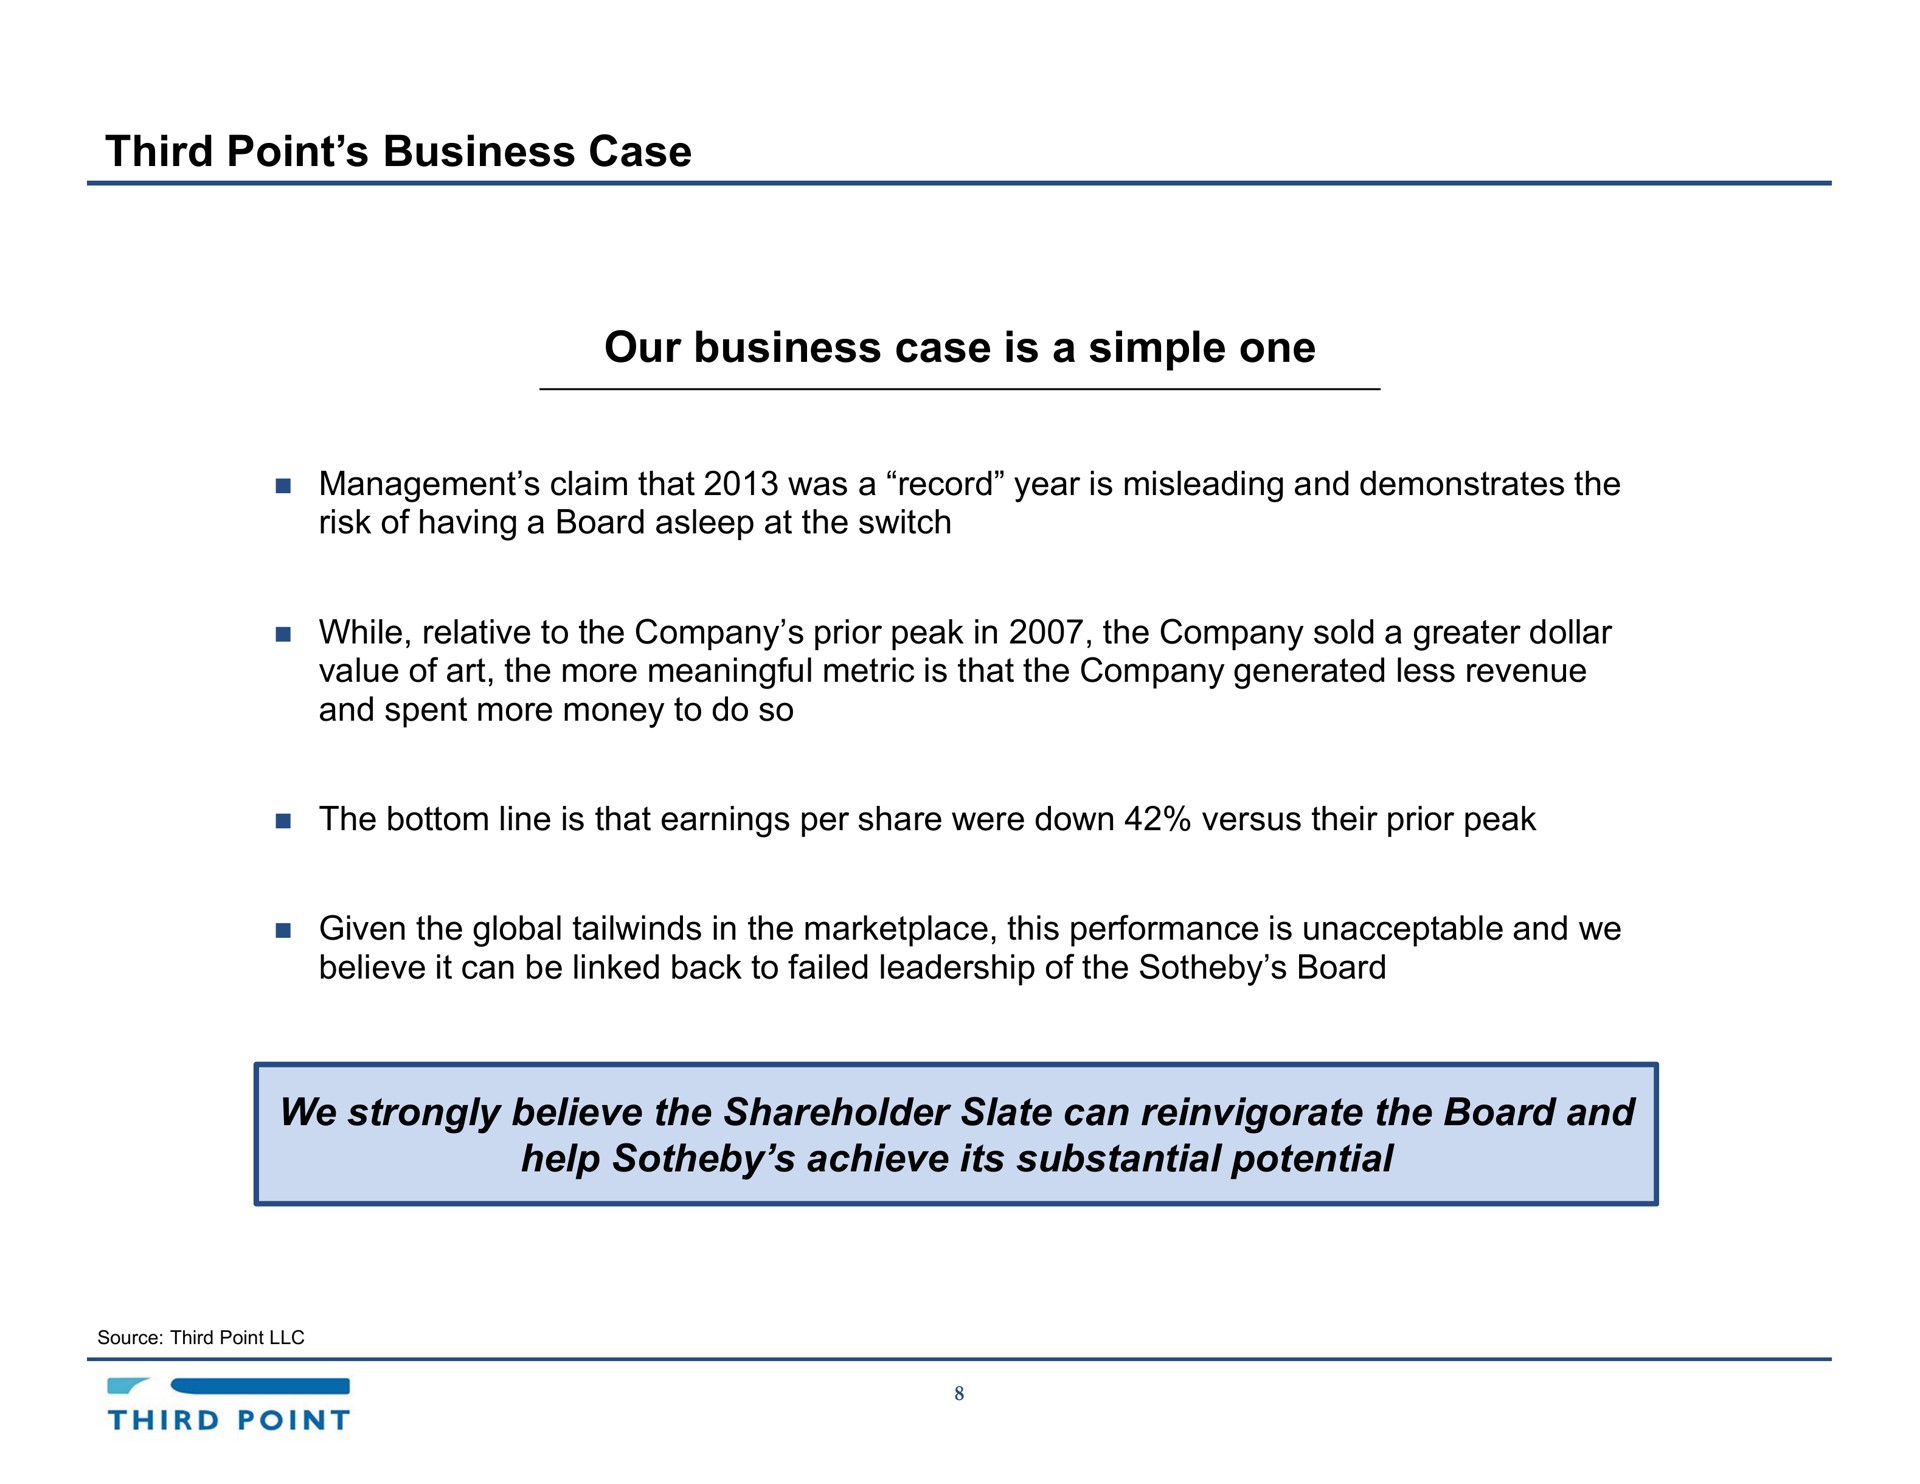 third point business case our business case is a simple one we strongly believe the shareholder slate can reinvigorate the board and help achieve its substantial potential | Third Point Management